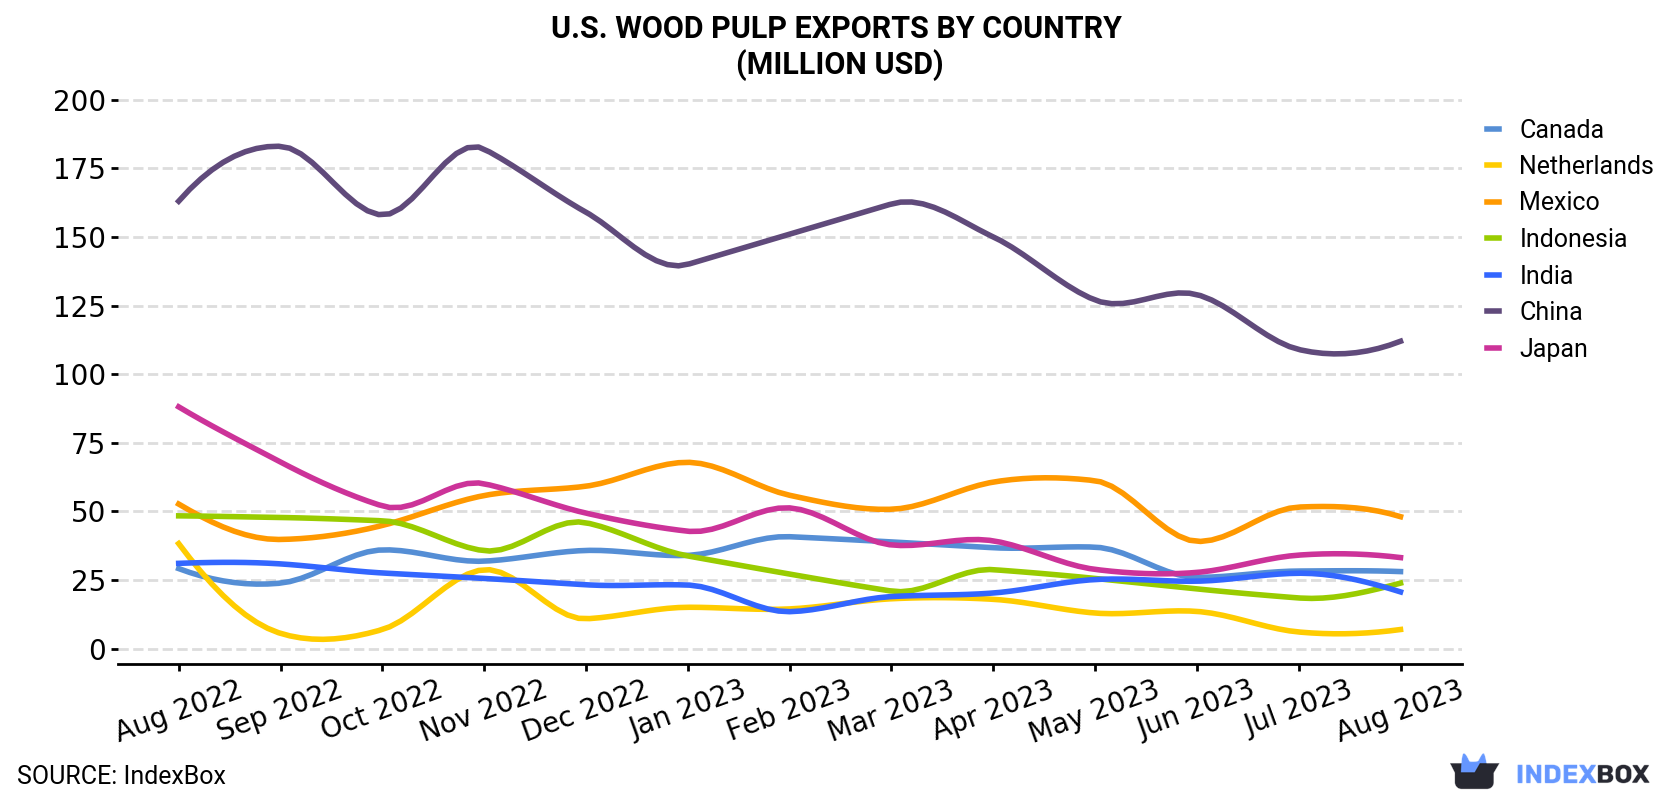 U.S. Wood Pulp Exports By Country (Million USD)